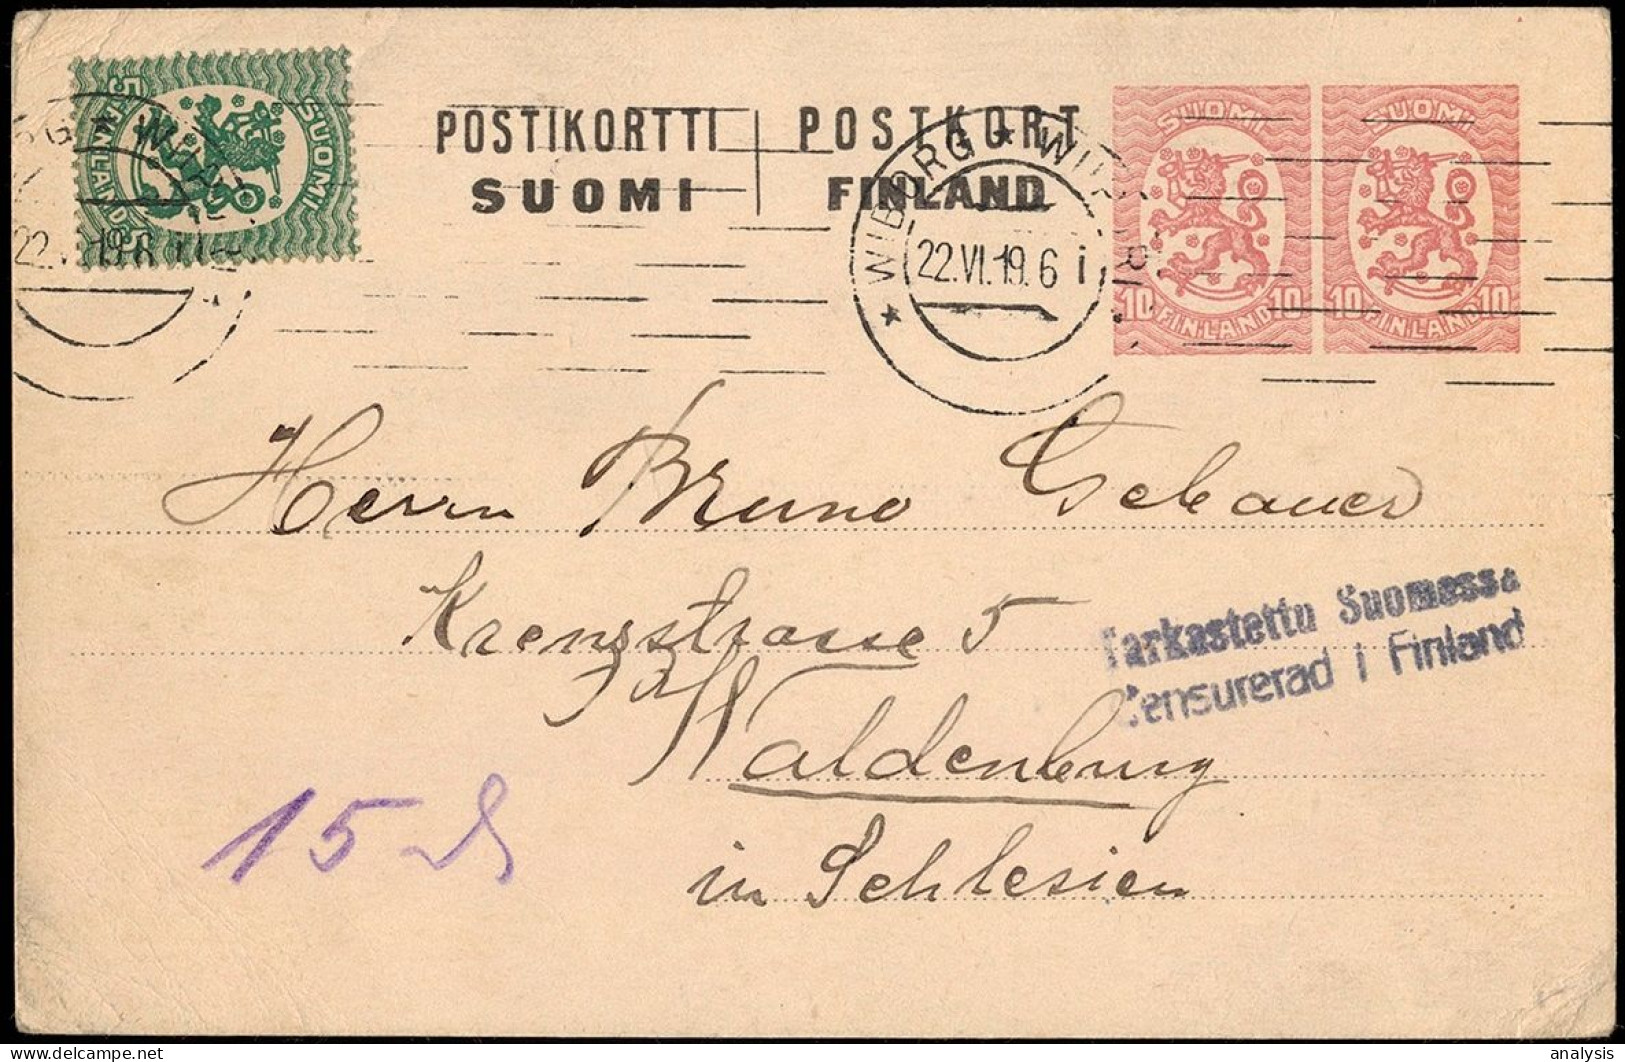 Finland Viipuri Uprated 2x10P Postal Stationery Card Mailed To Germany 1919 2-line Censor - Covers & Documents